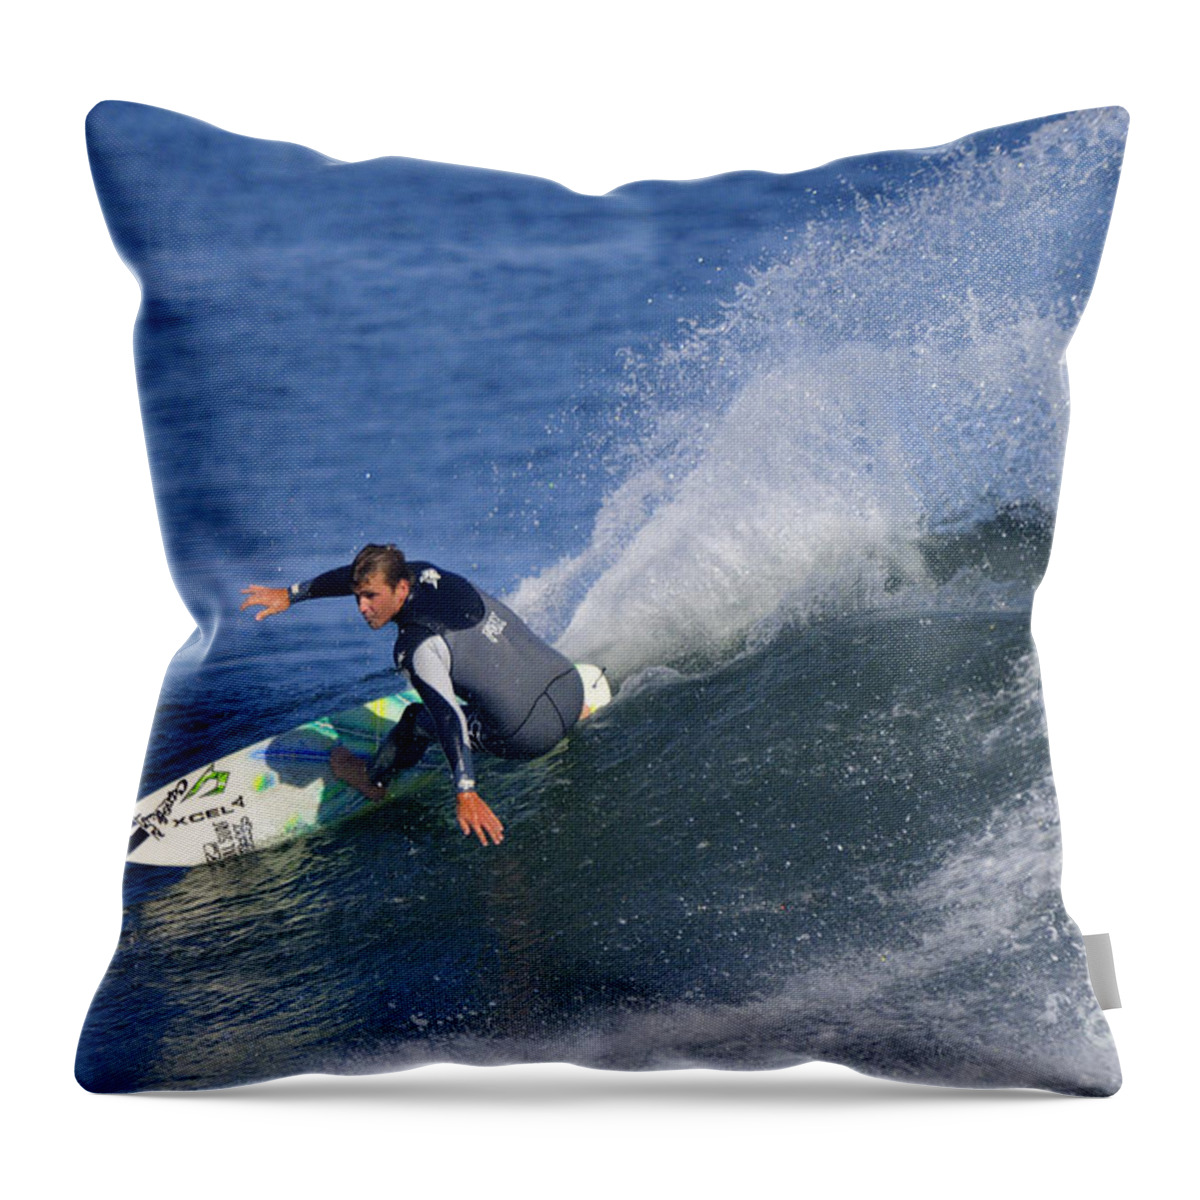 Surfer Throw Pillow featuring the photograph Surfer by Marc Bittan